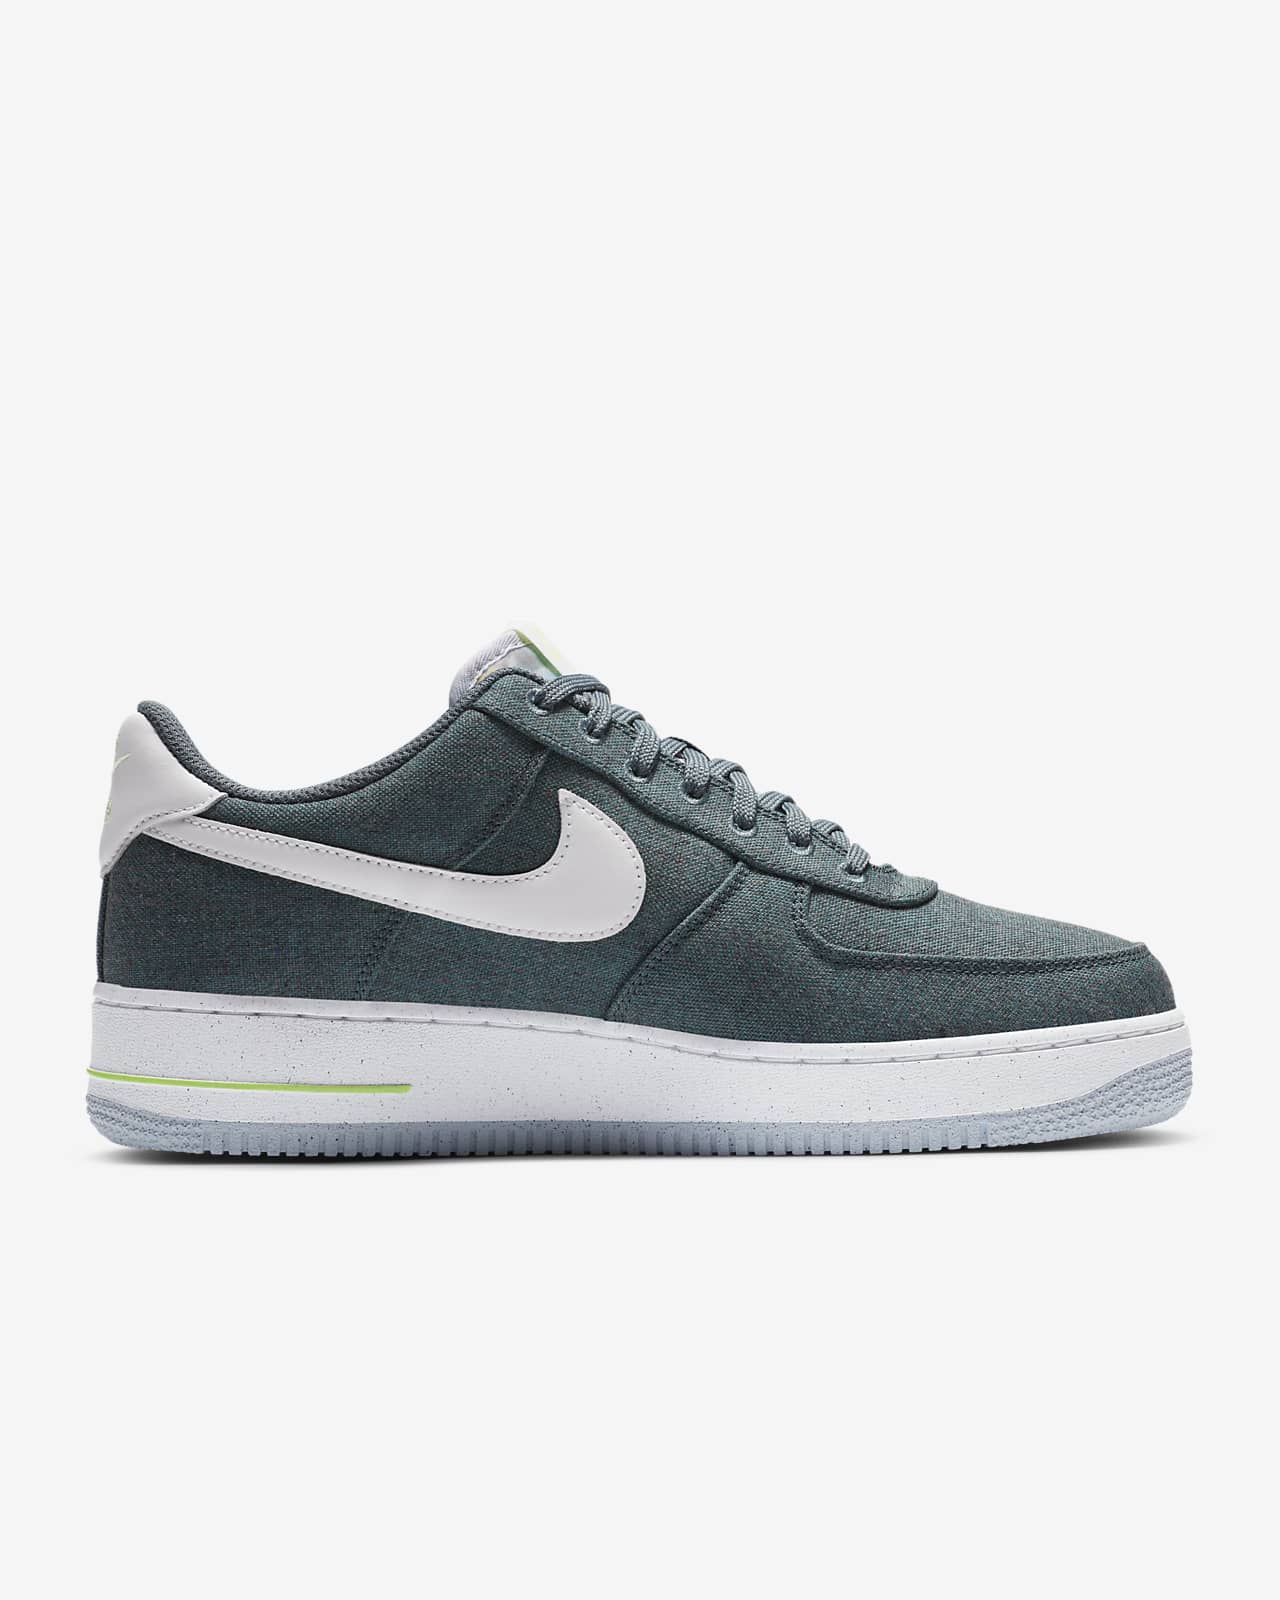 nike air force 1 07 low blue